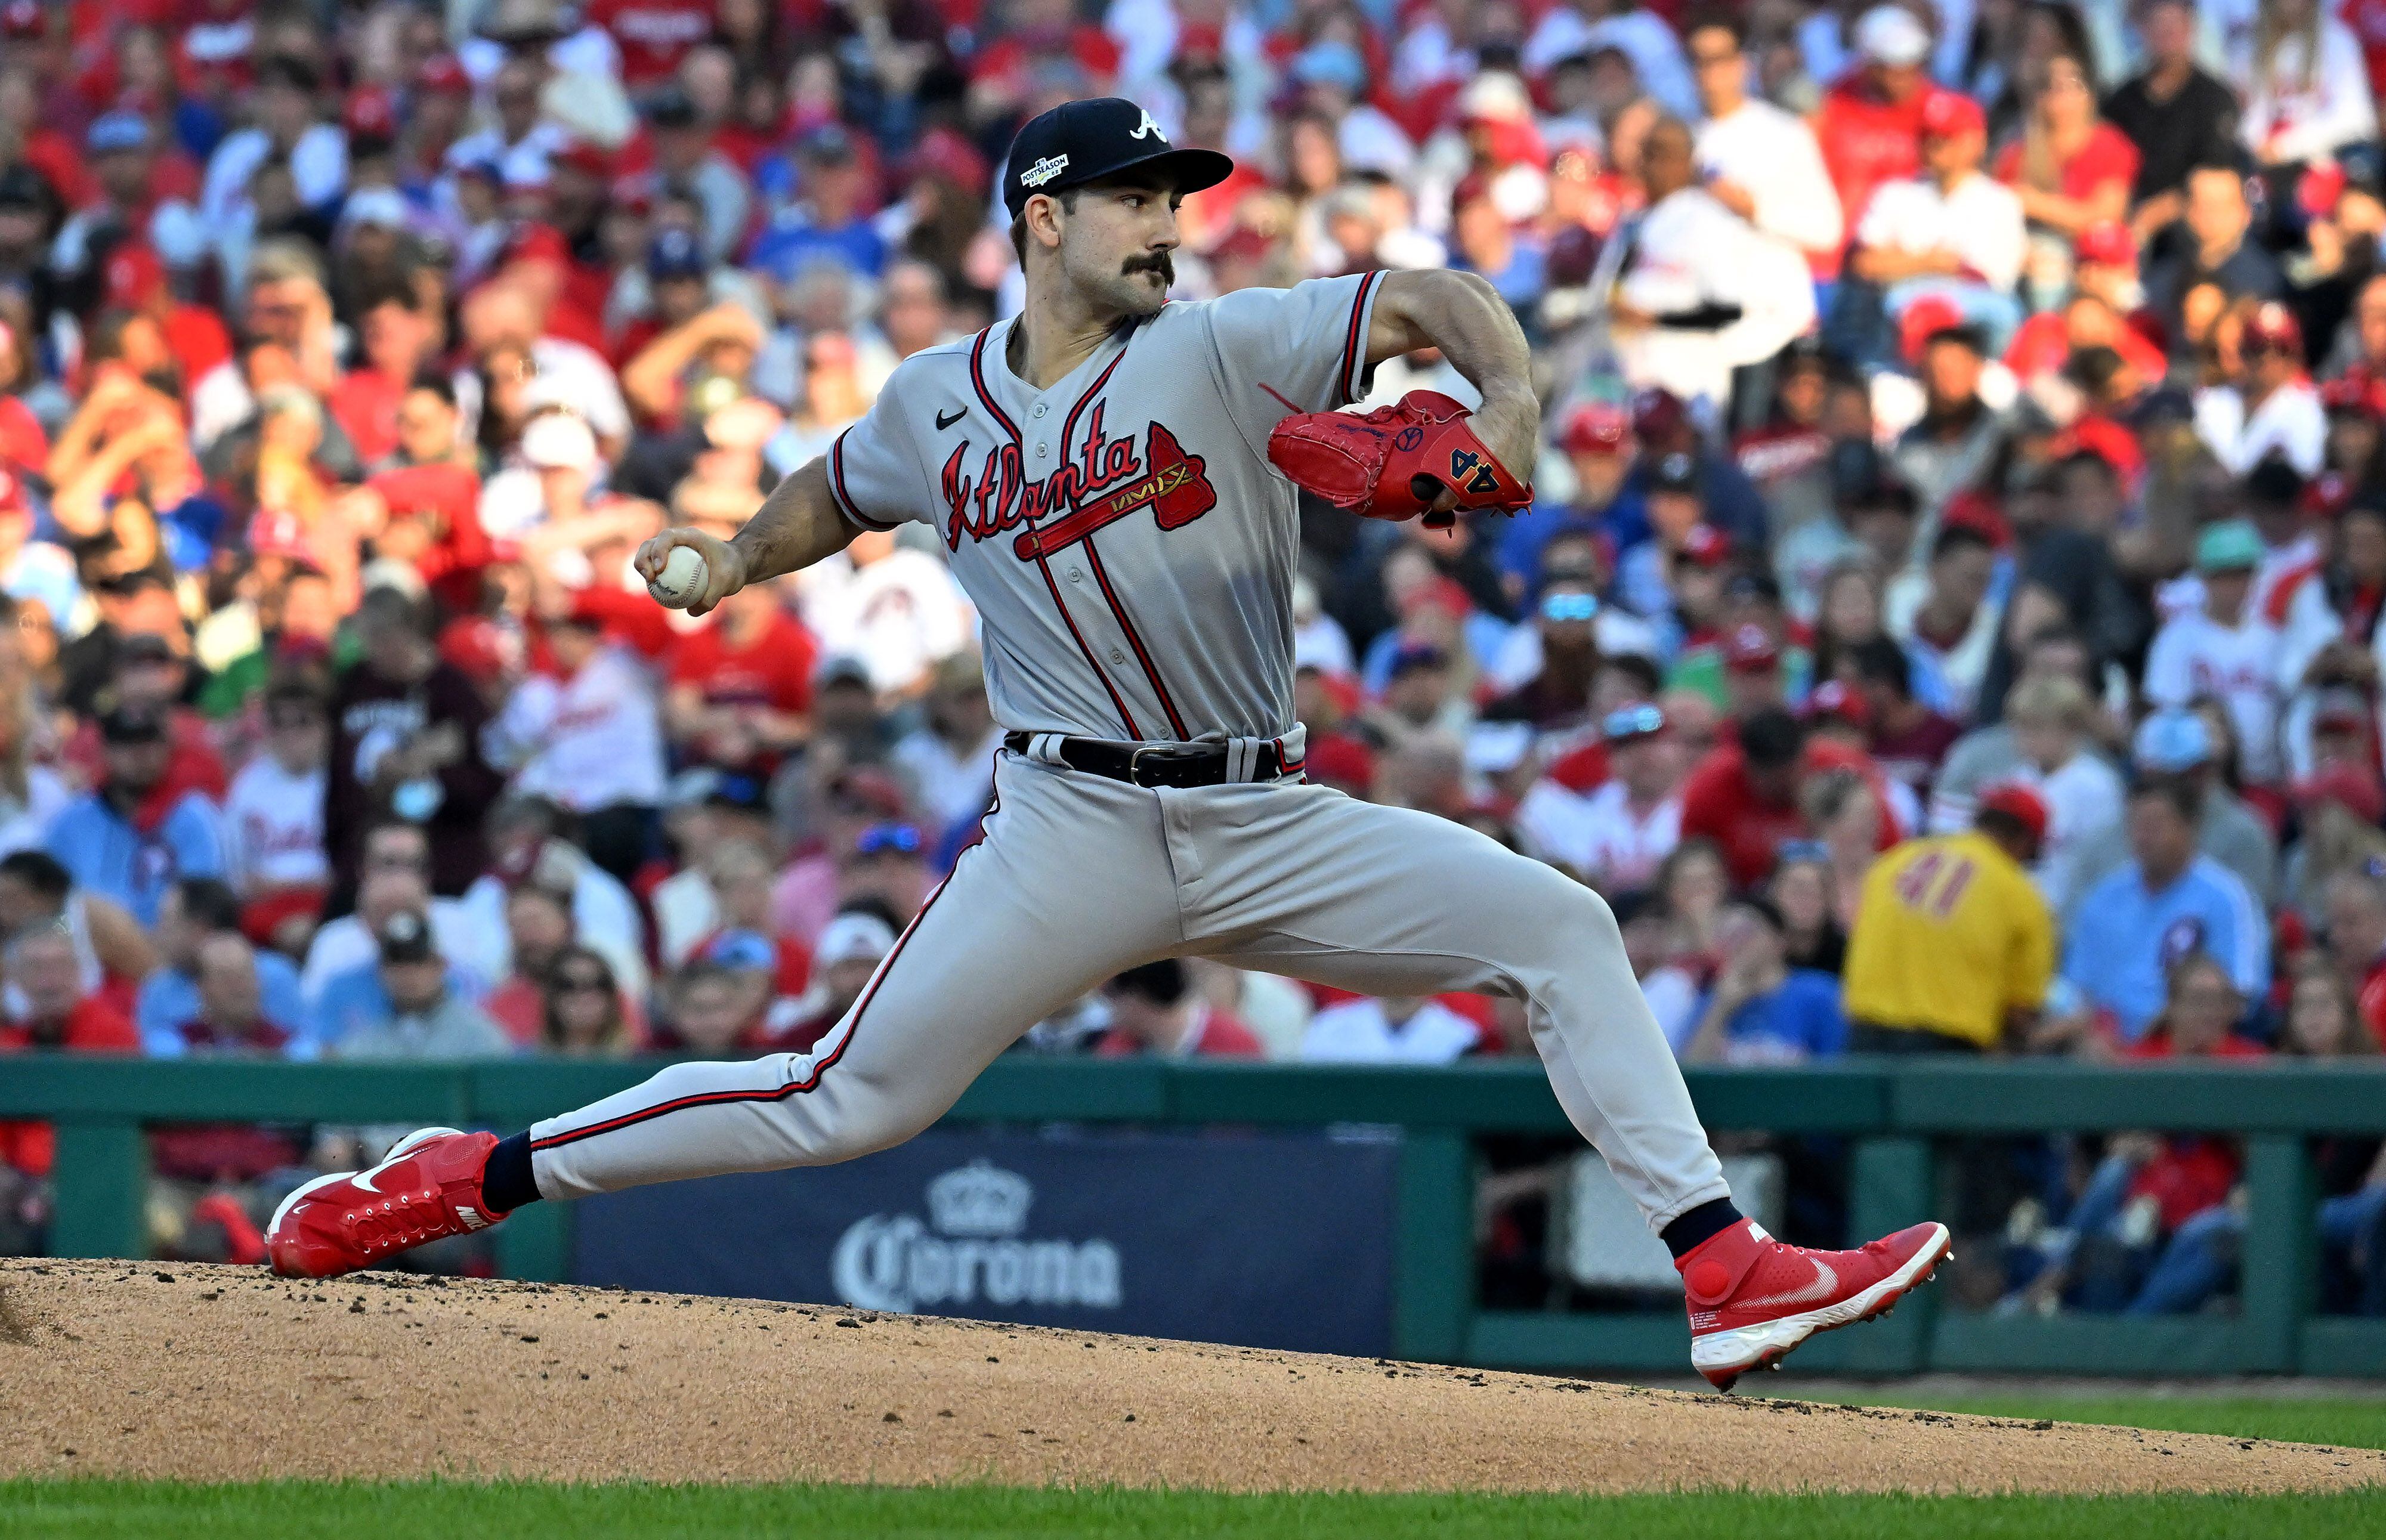 How the Braves' Spencer Strider rebuilt his mental approach to